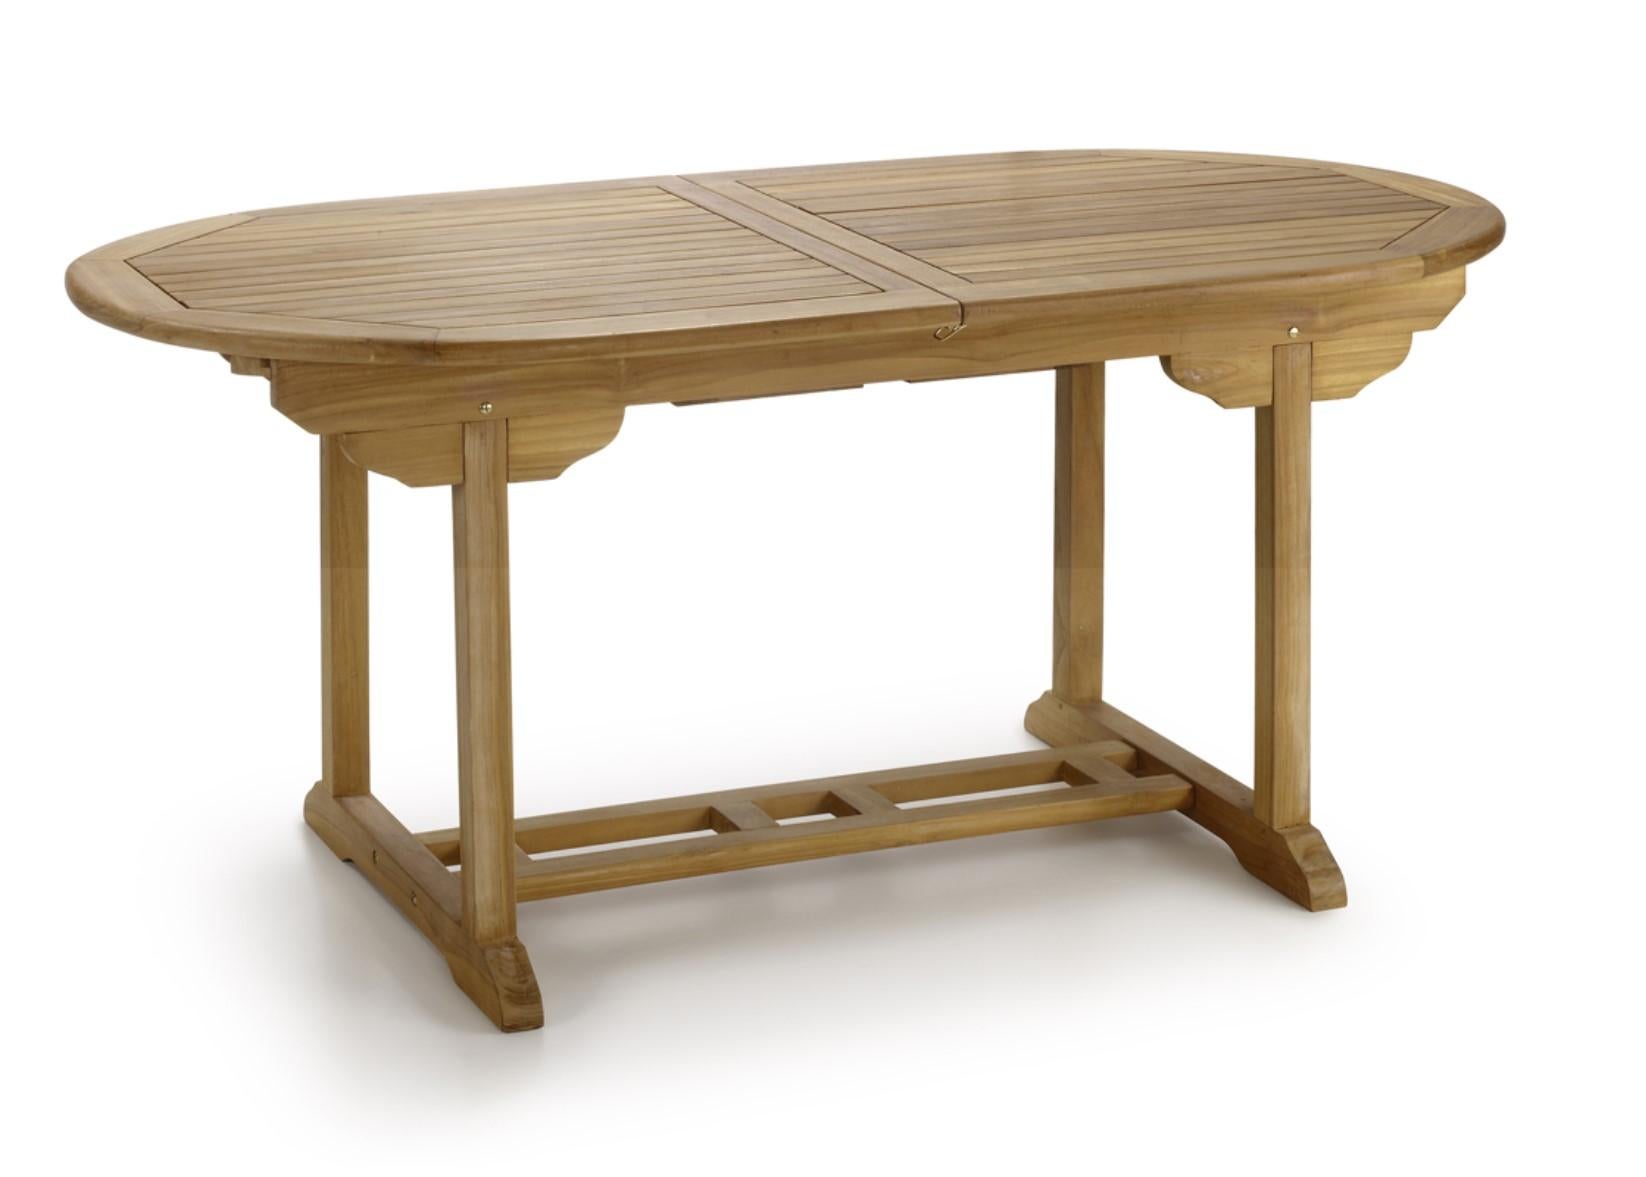 New teak round foldable dining table, indoor and outdoor

Extendable: 66.92in-86.61in.